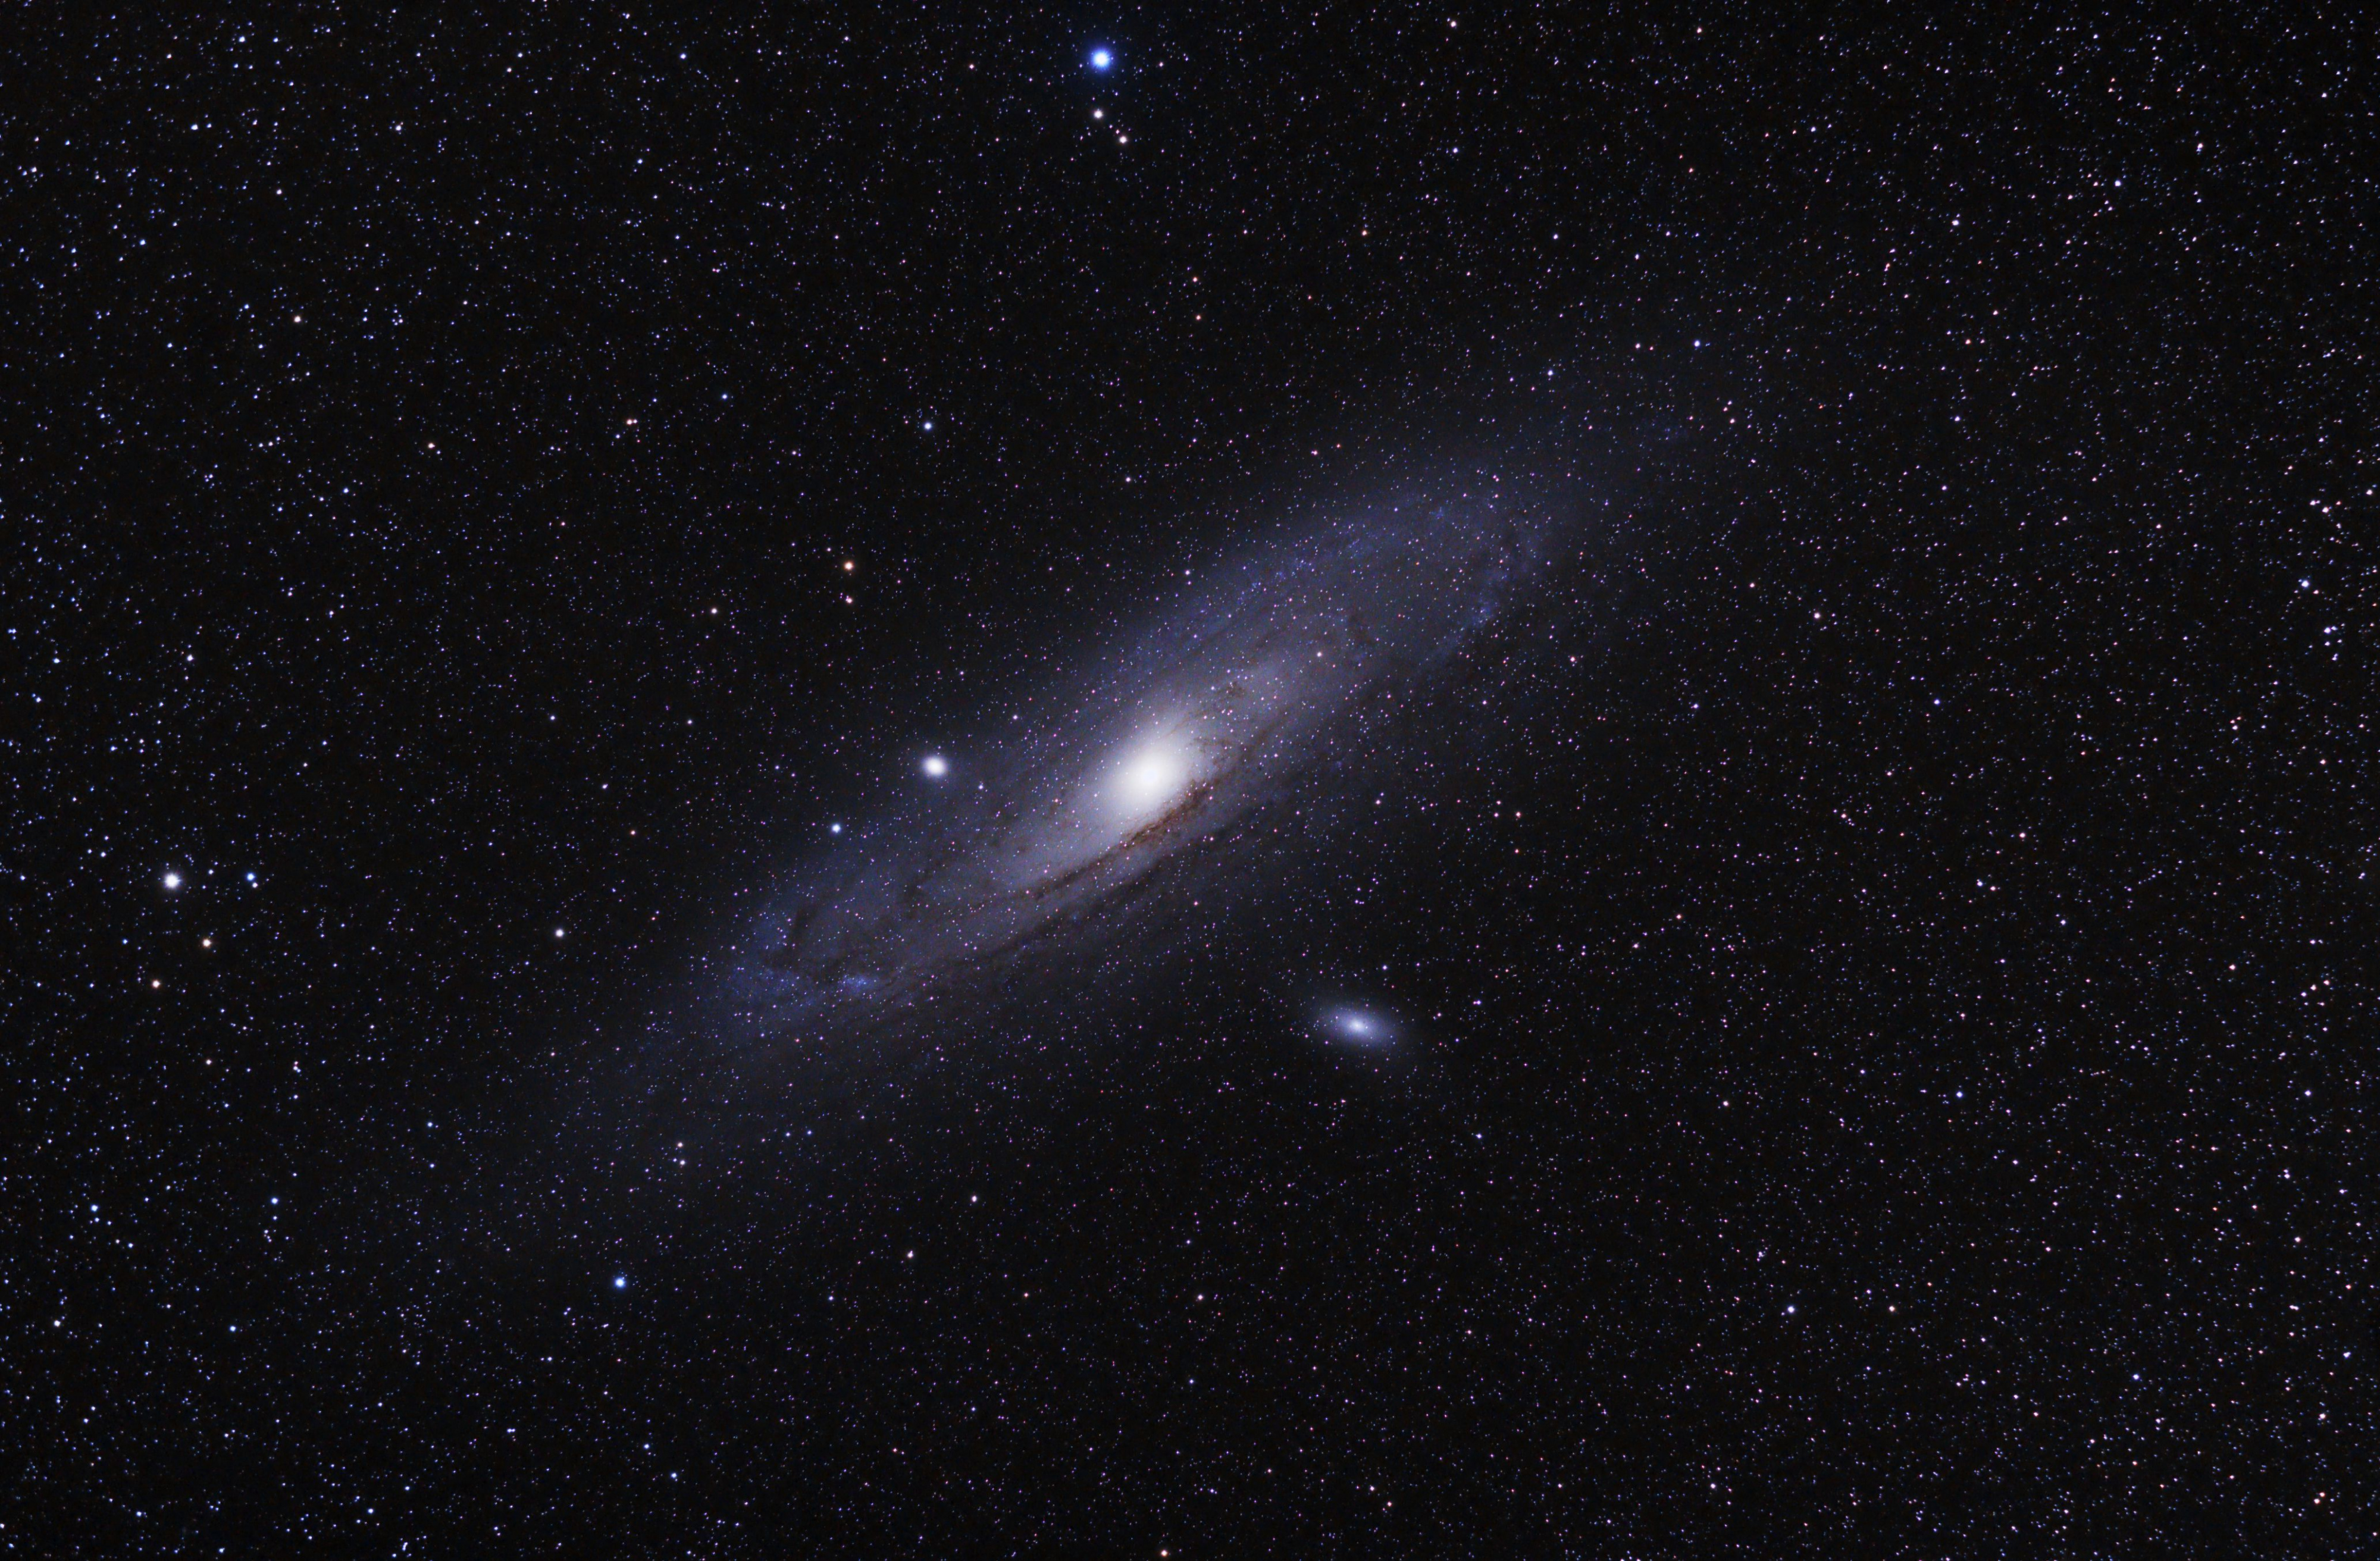 M31 - Galaxie d'Andromède